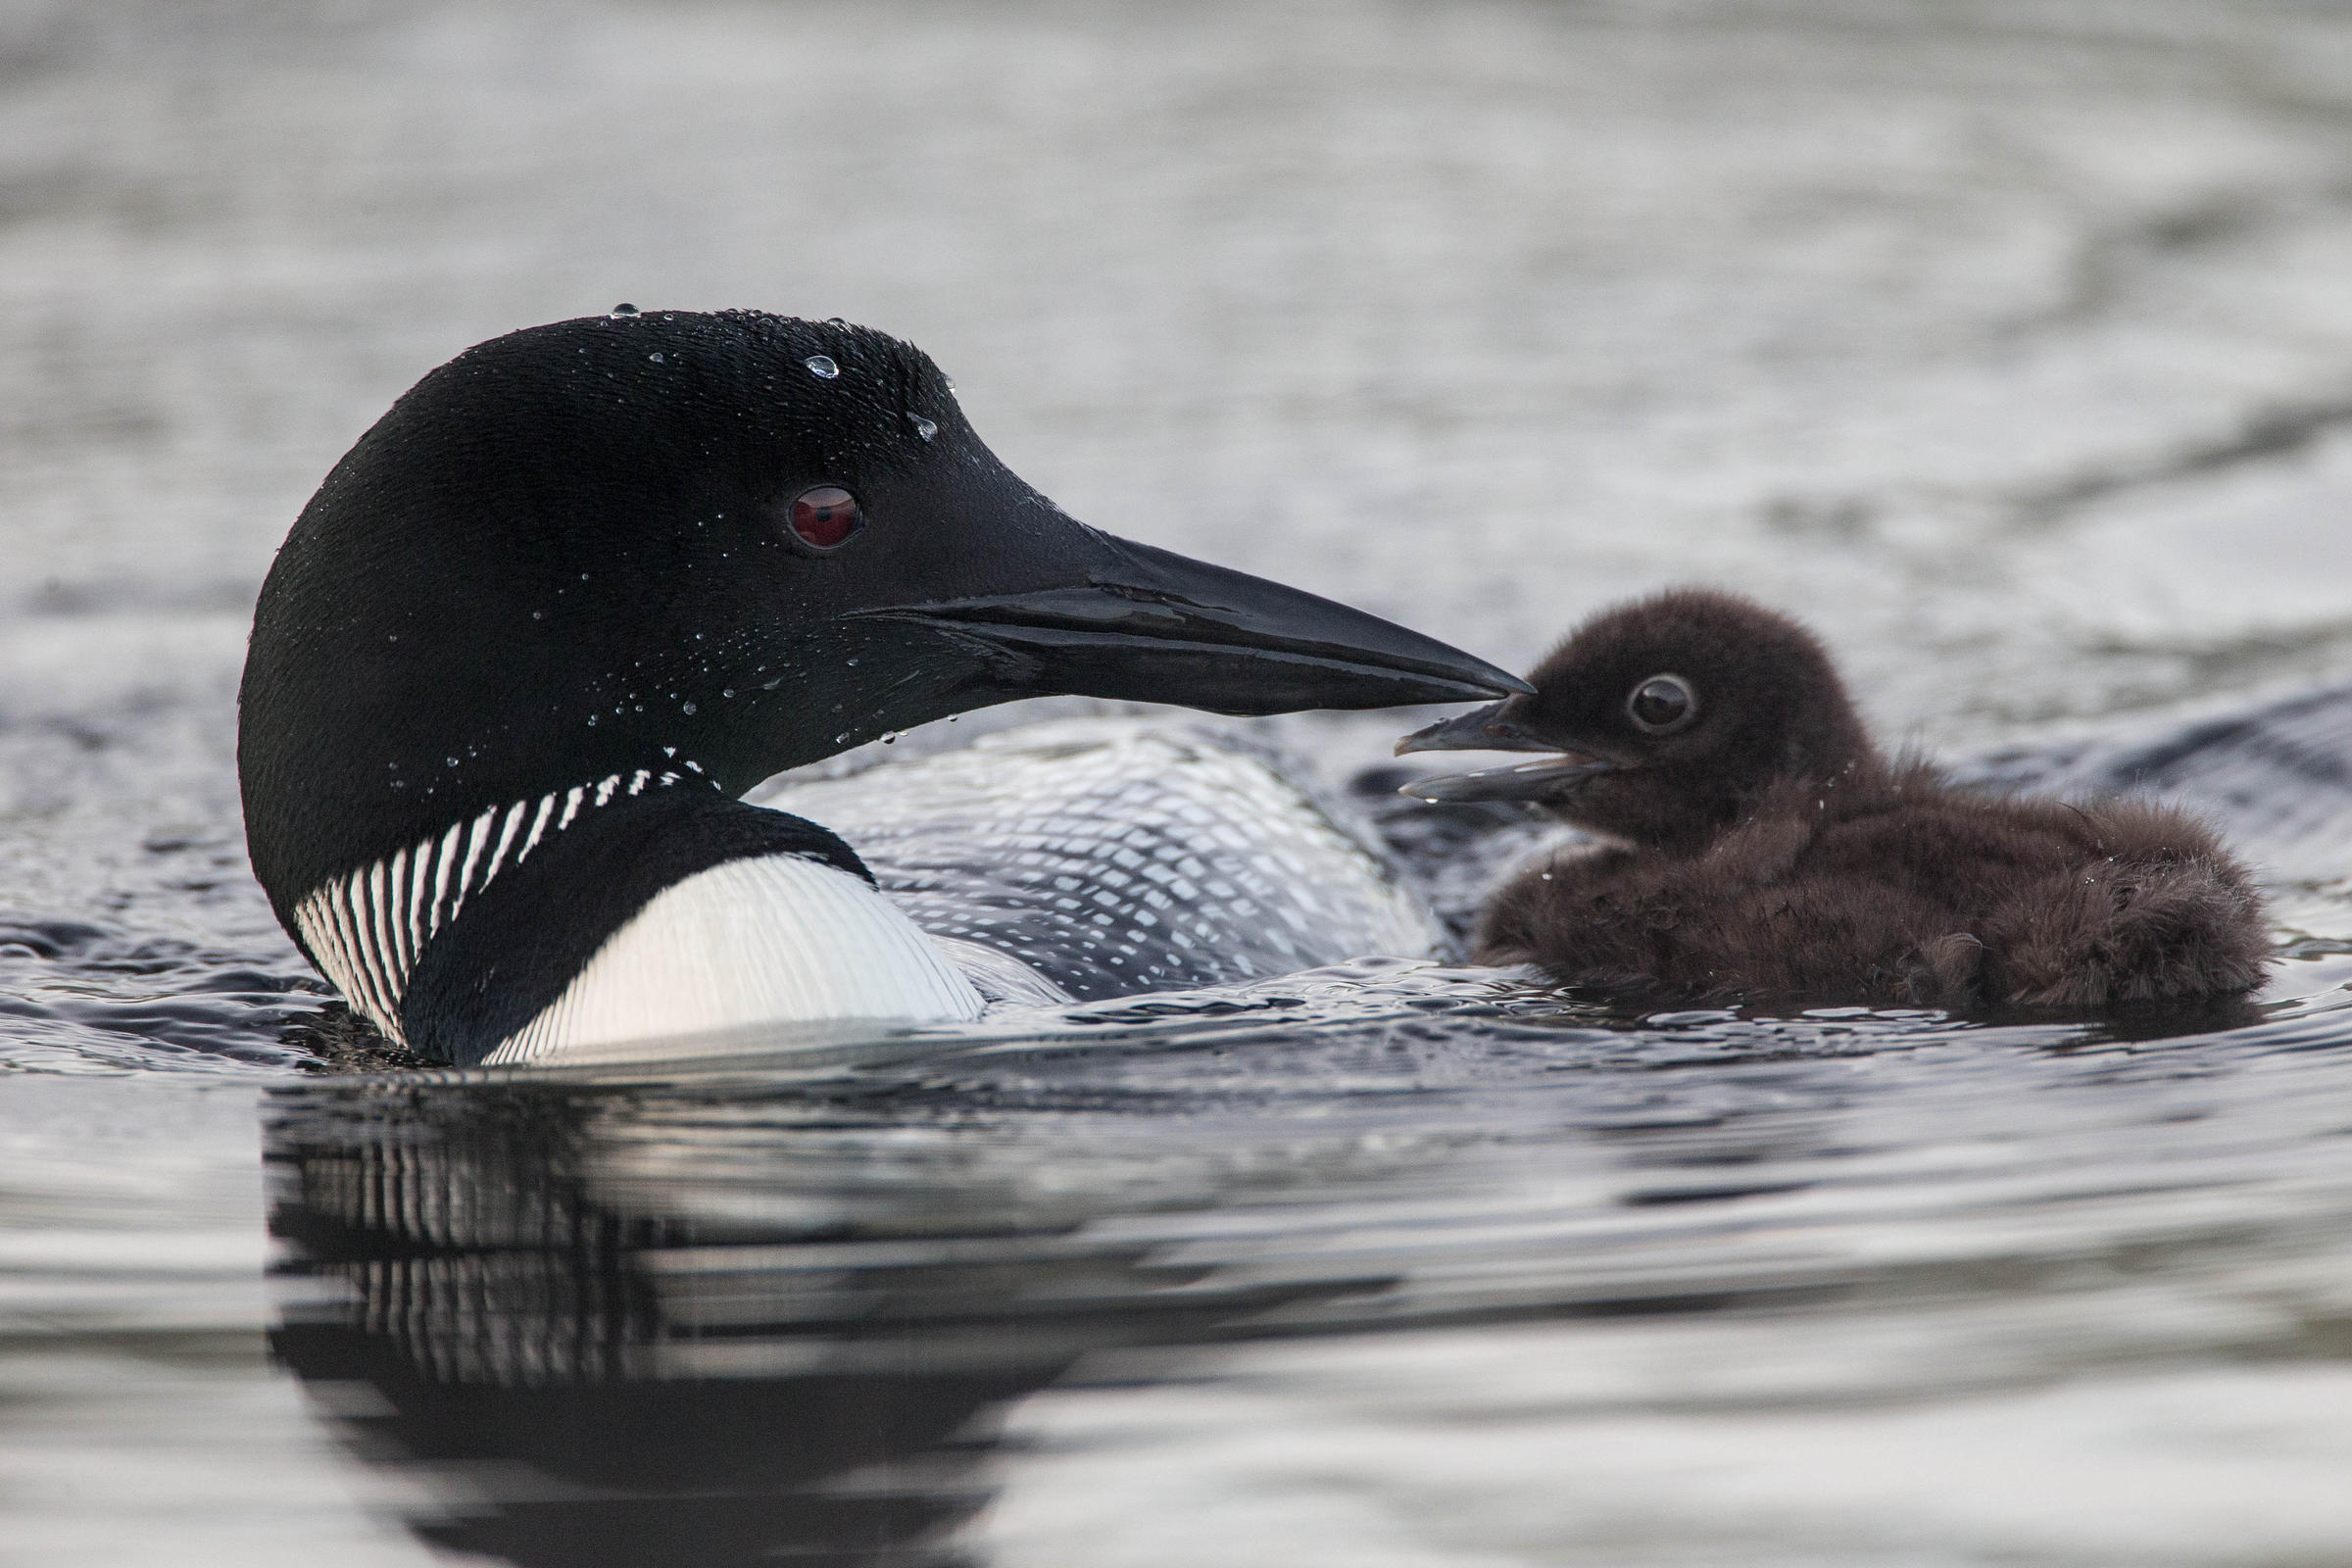 Loons in Maine: What is Being Done To Manage and Protect This Aquatic